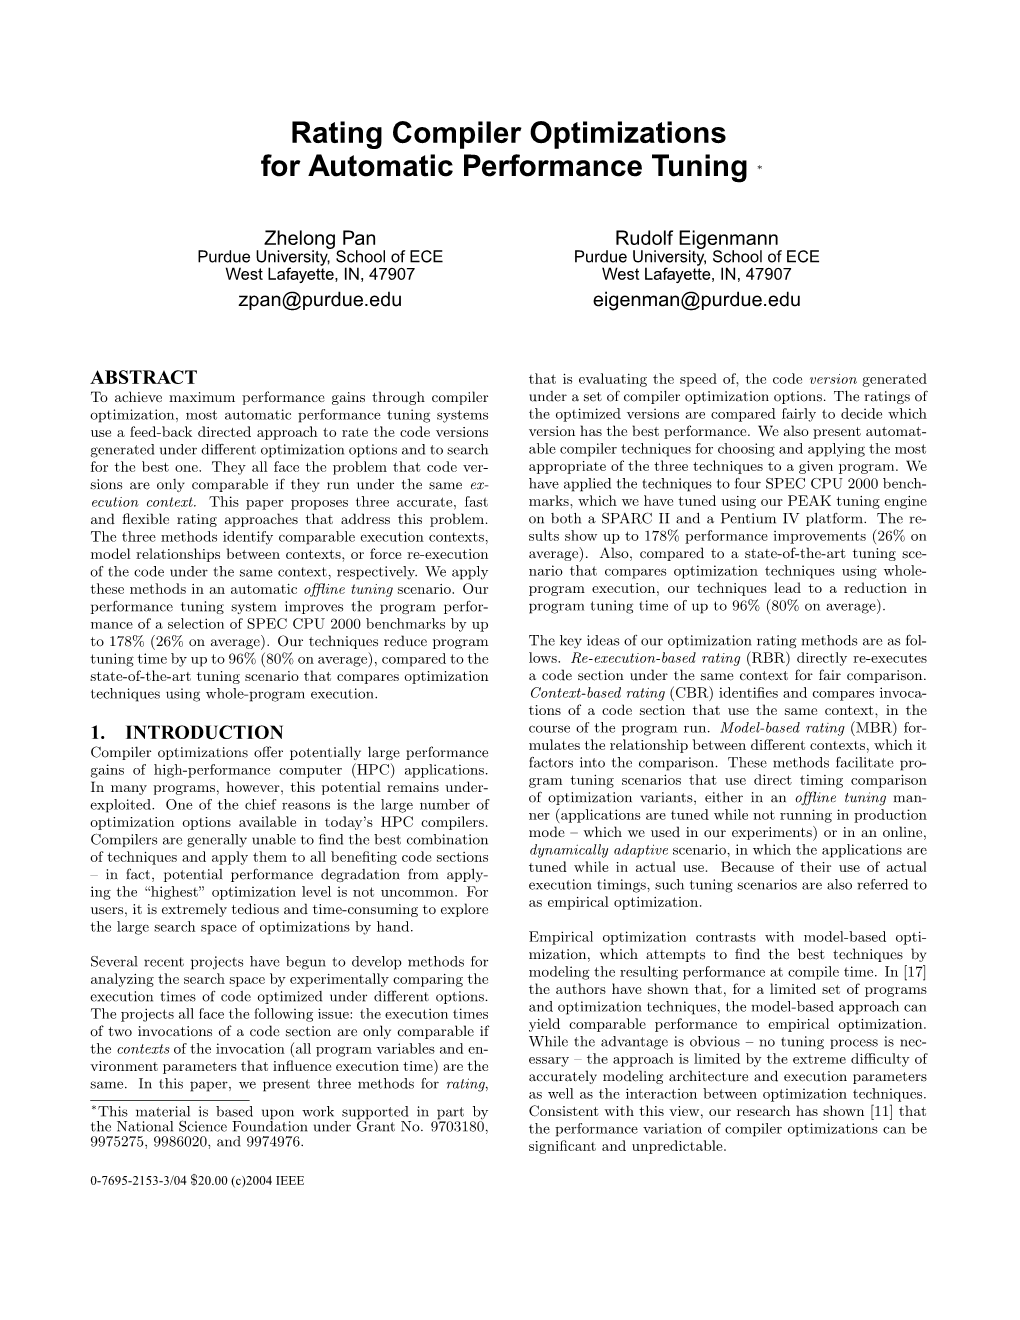 Rating Compiler Optimizations for Automatic Performance Tuning *